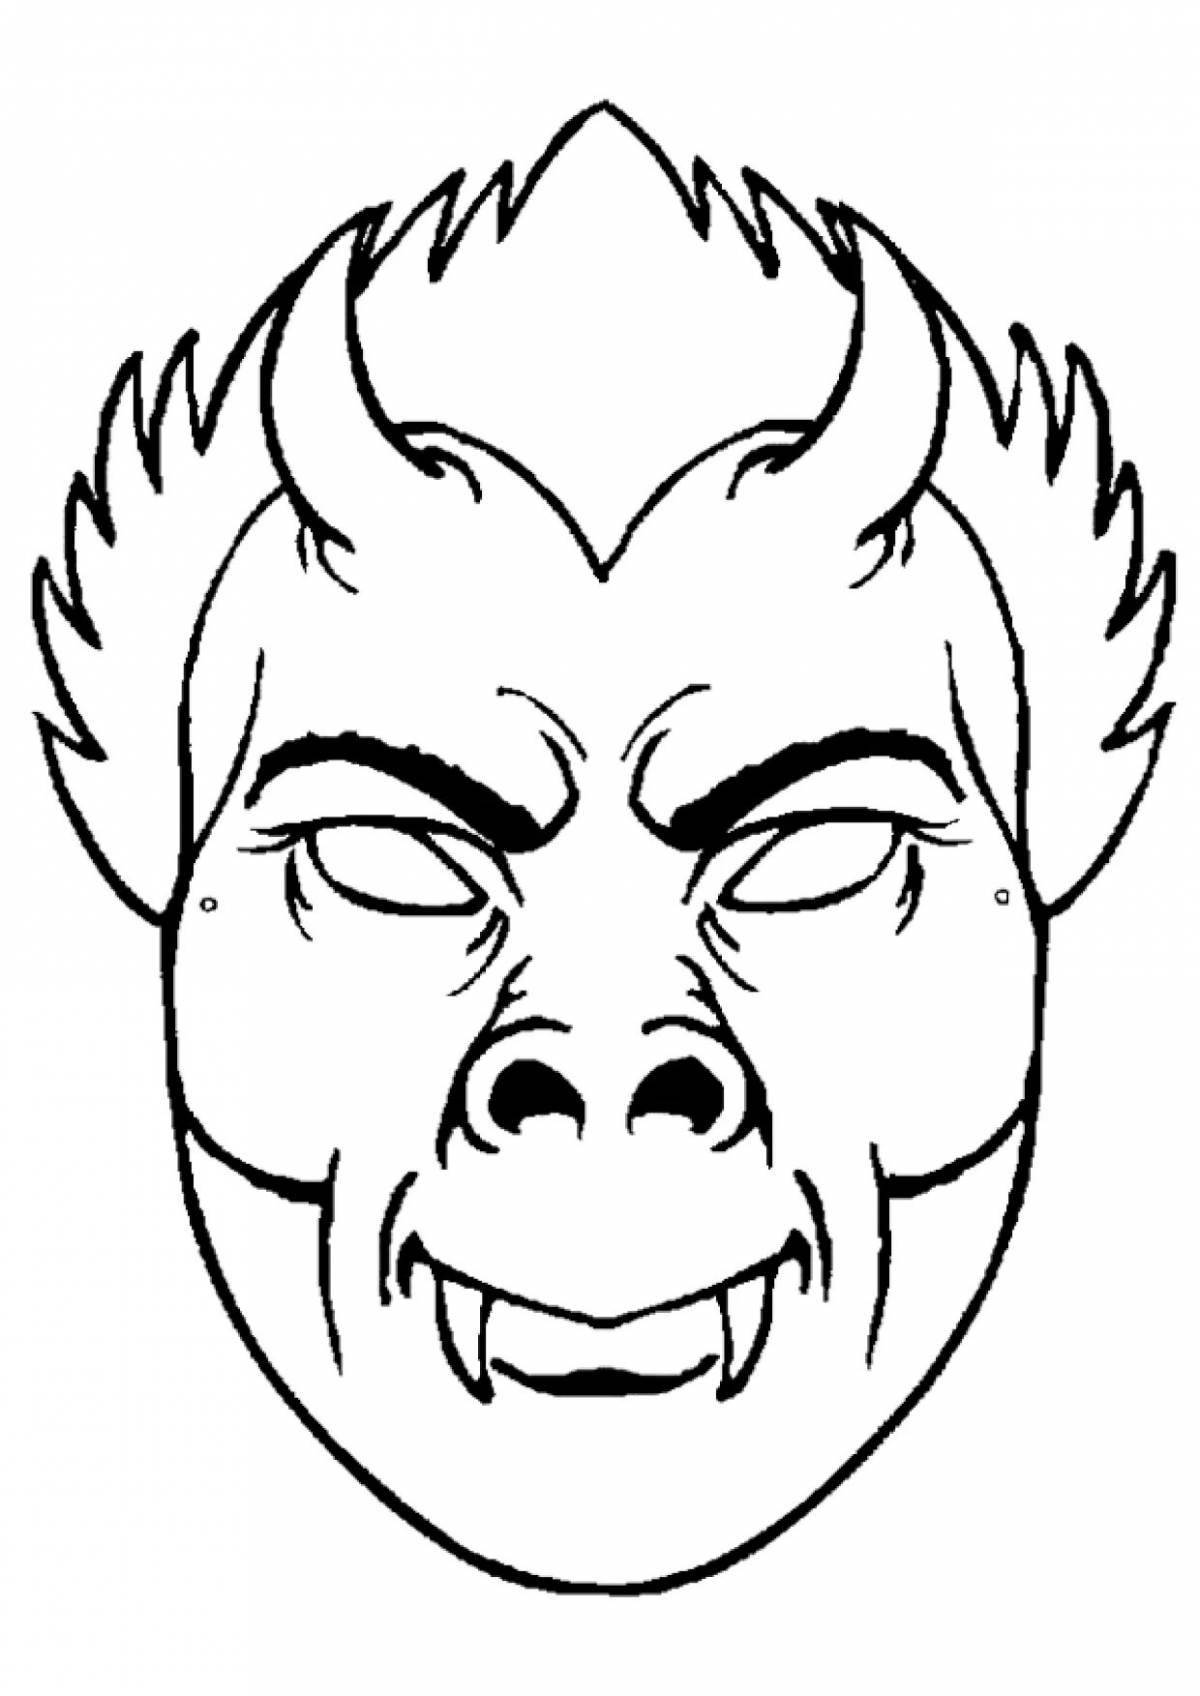 Disturbing scary face coloring page